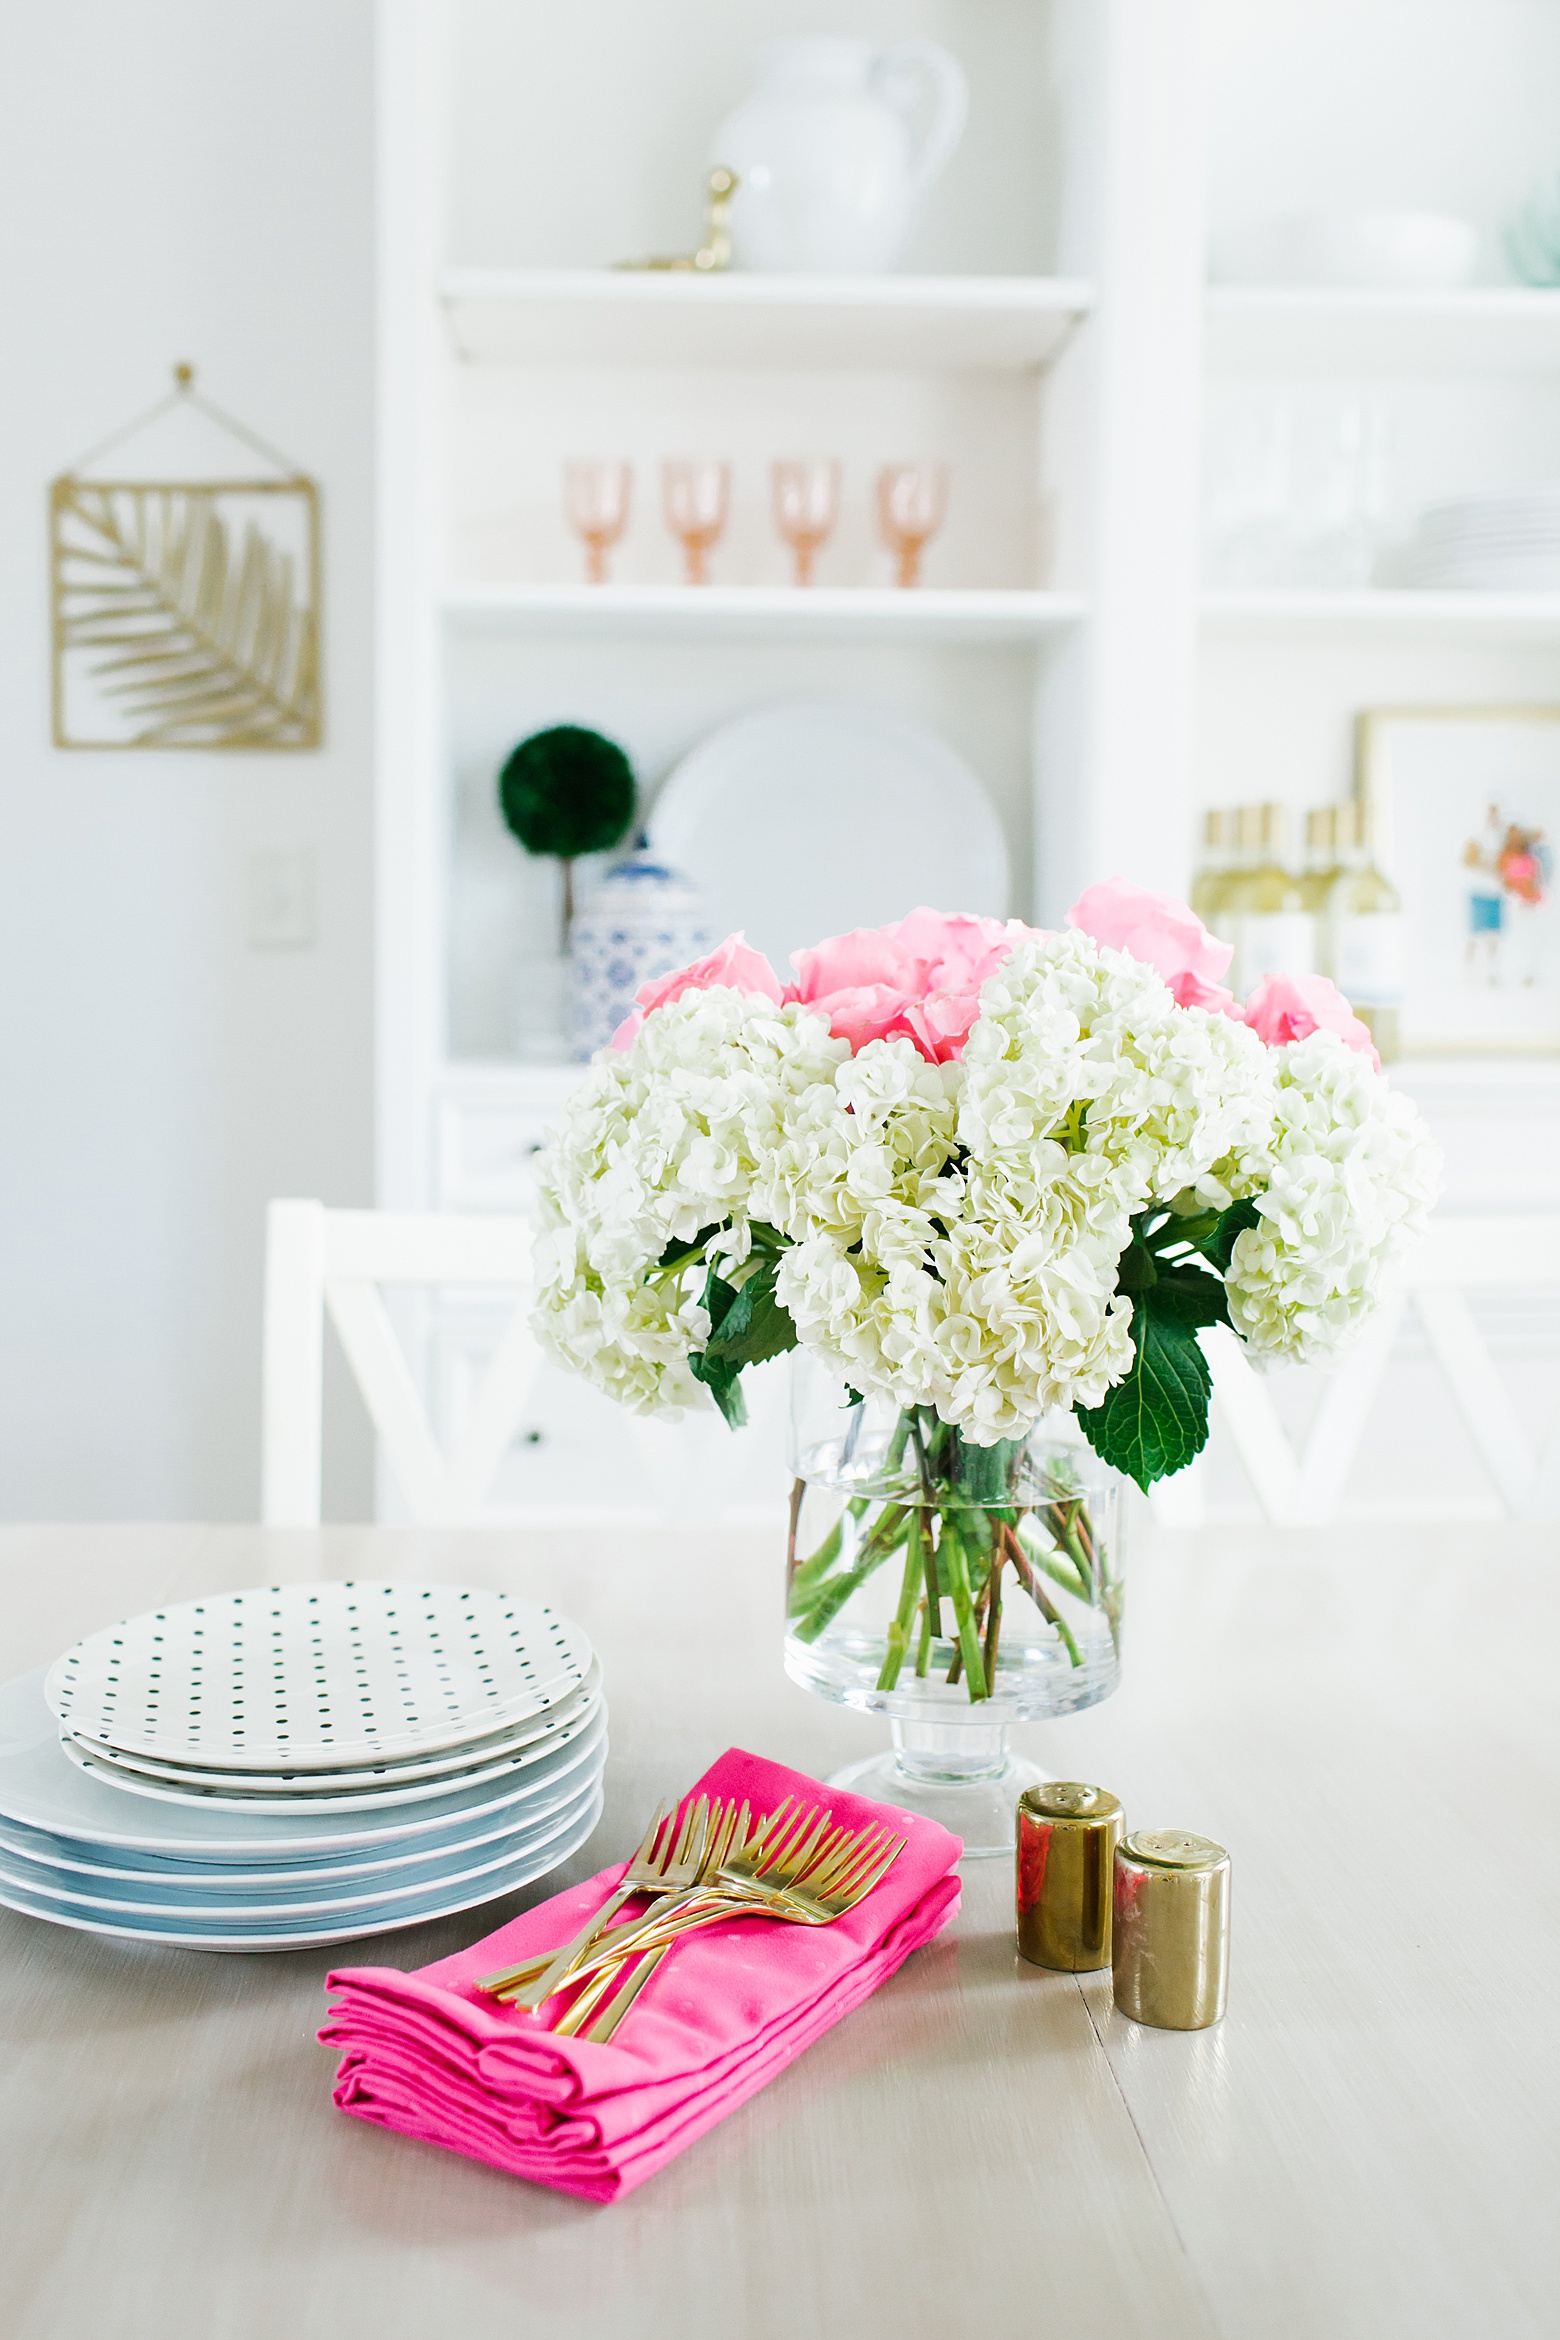 A Bright and Colorful Dining room in Florida, kate spade dinnerware, gold flatware, pink napkins, shelfie, design by Megan Martin Creative